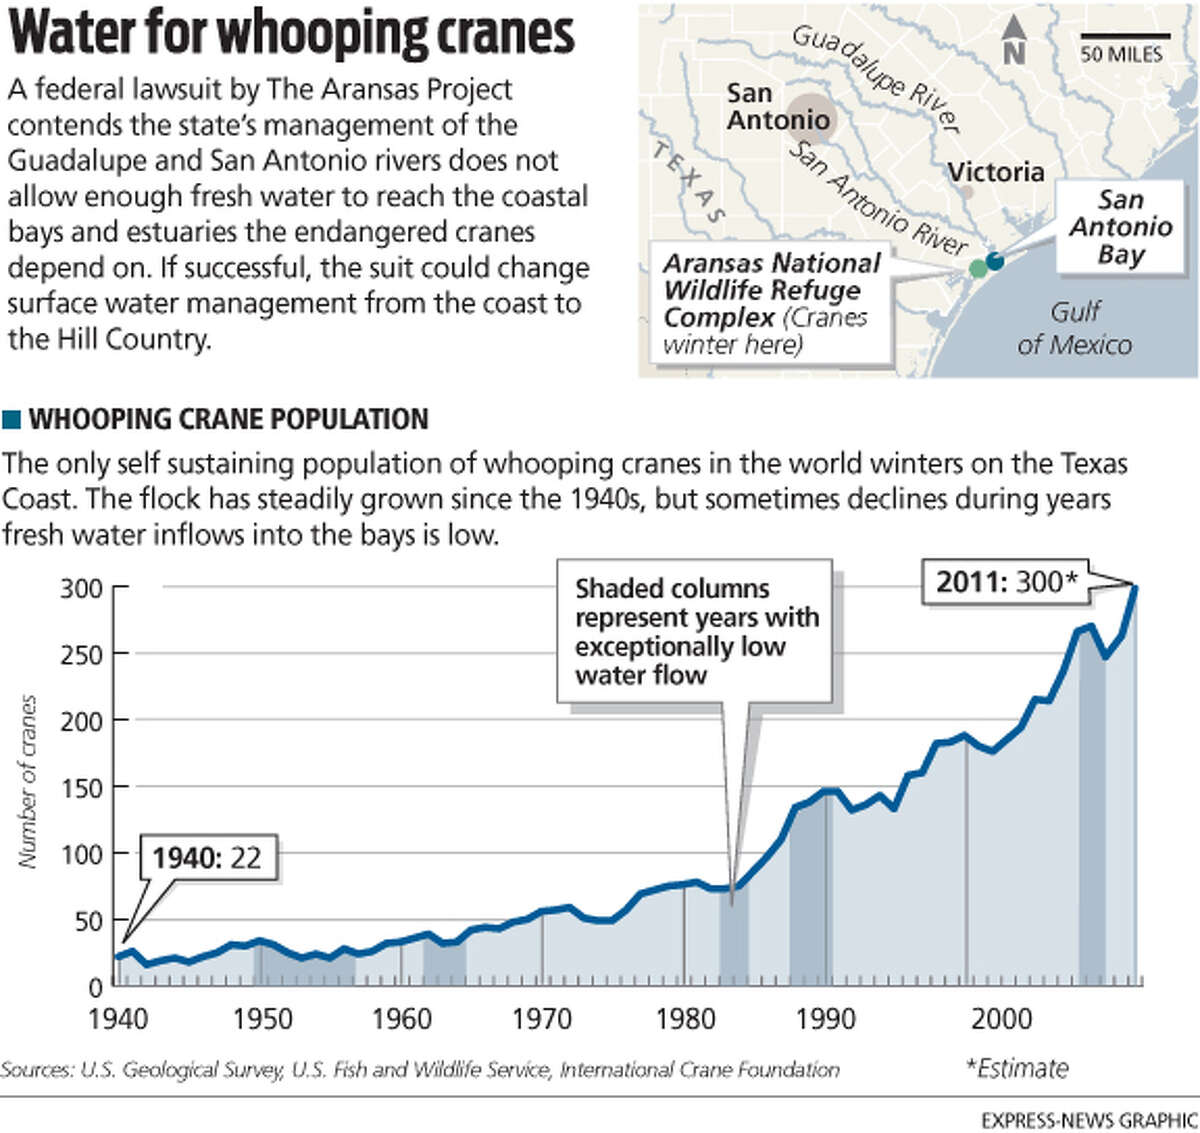 Water for whooping cranes A federal lawsuit by The Aransas Project contends the state’s management of the Guadalupe and San Antonio rivers does not allow enough fresh water to reach the coastal bays and estuaries the endangered cranes depend on. If successful, the suit could change surface water management from the coast to the Hill Country.